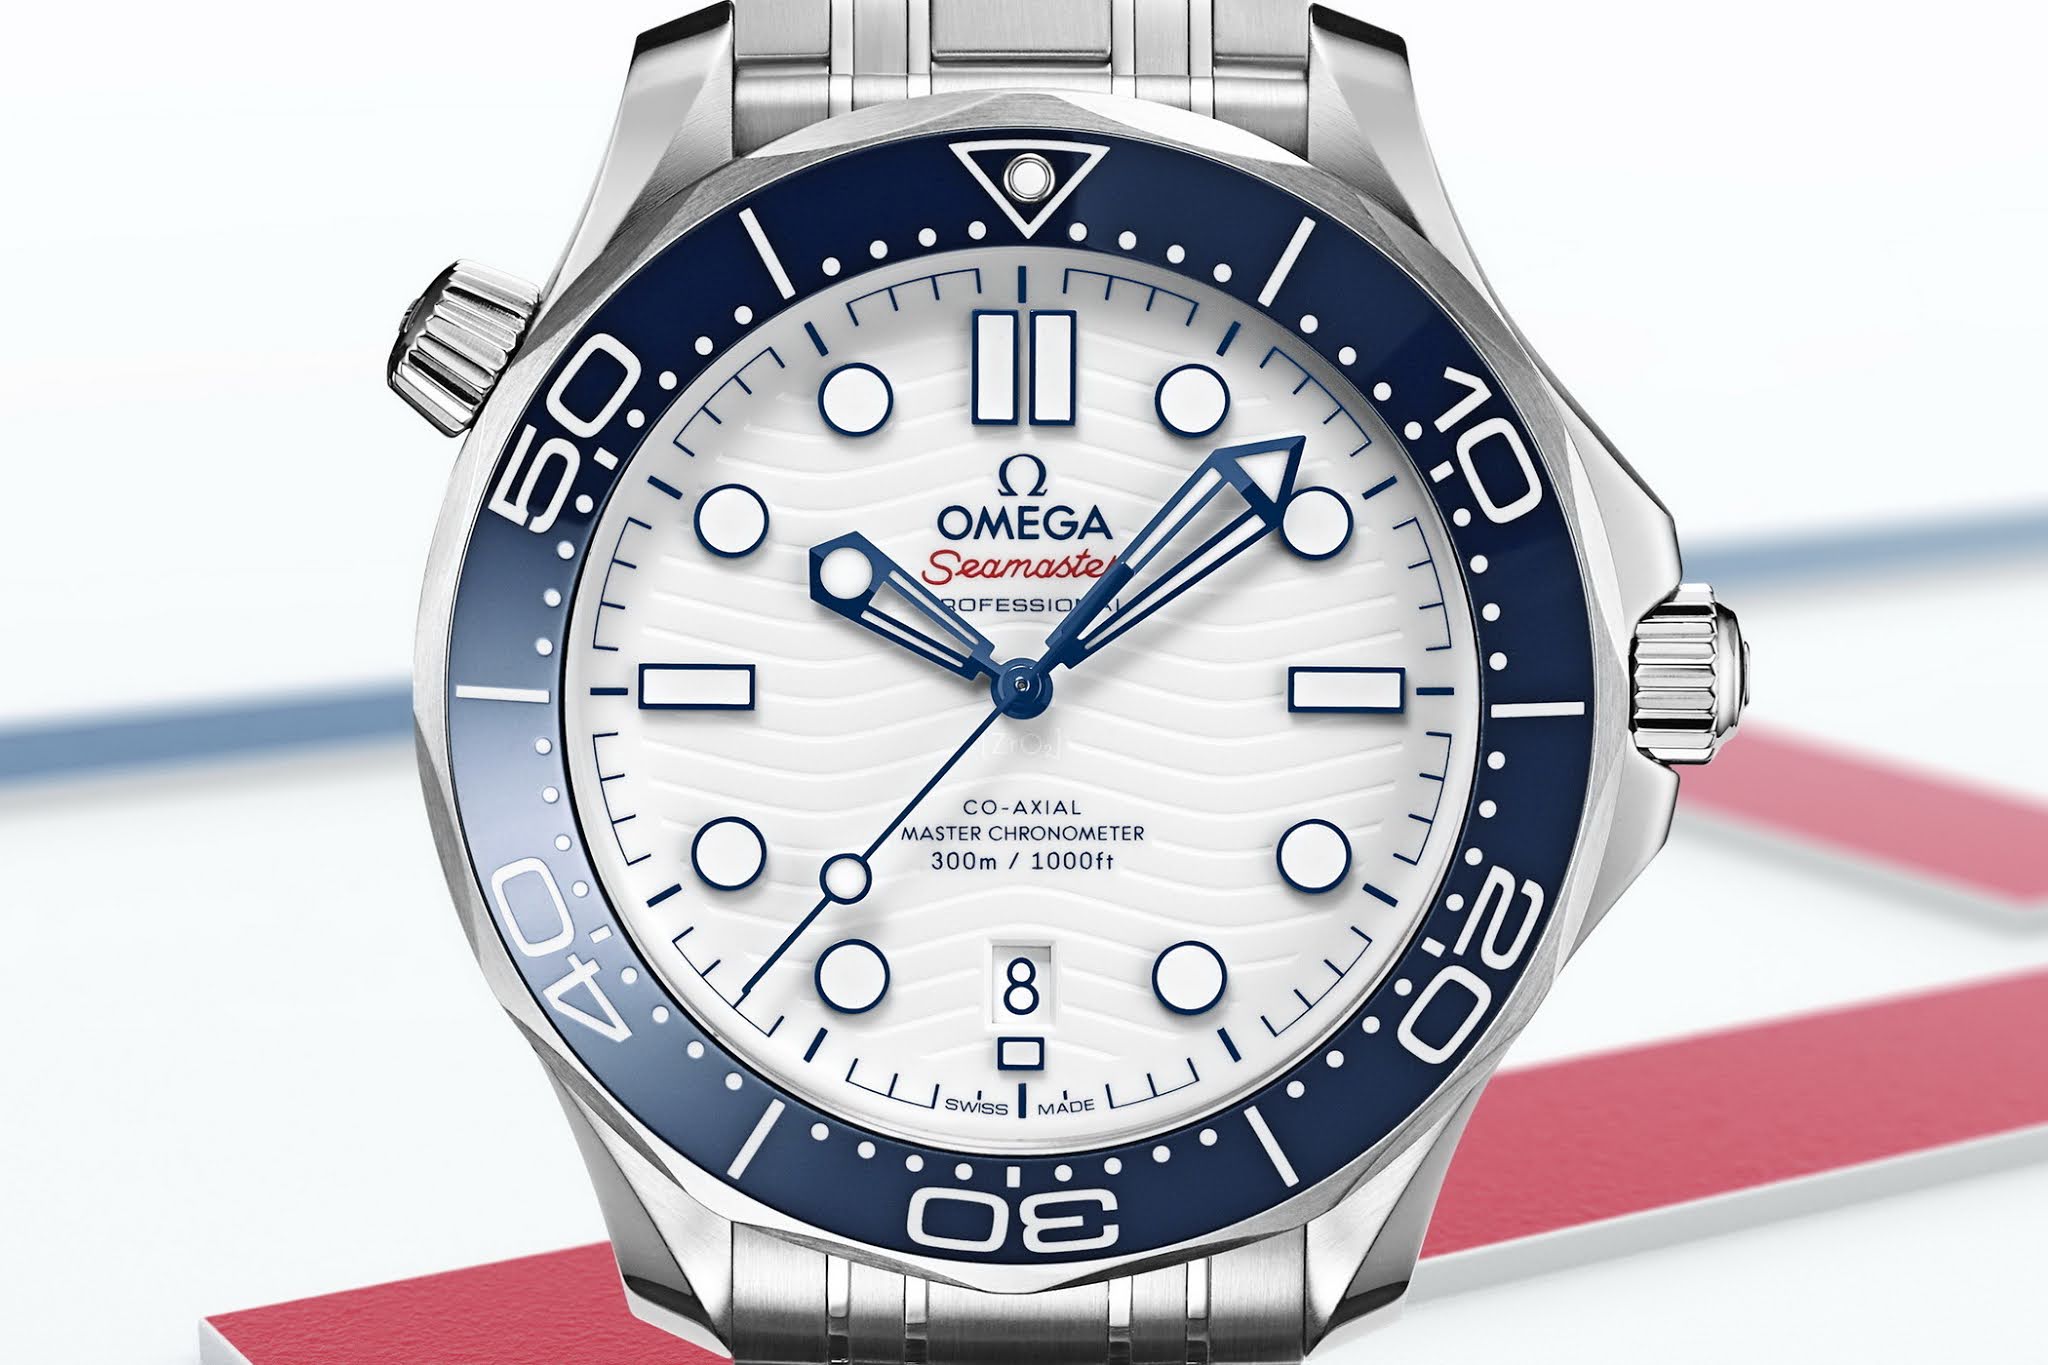 OceanicTime: OMEGA Seamaster Diver 300M TOKYO 2020 [Olympic inspired?]